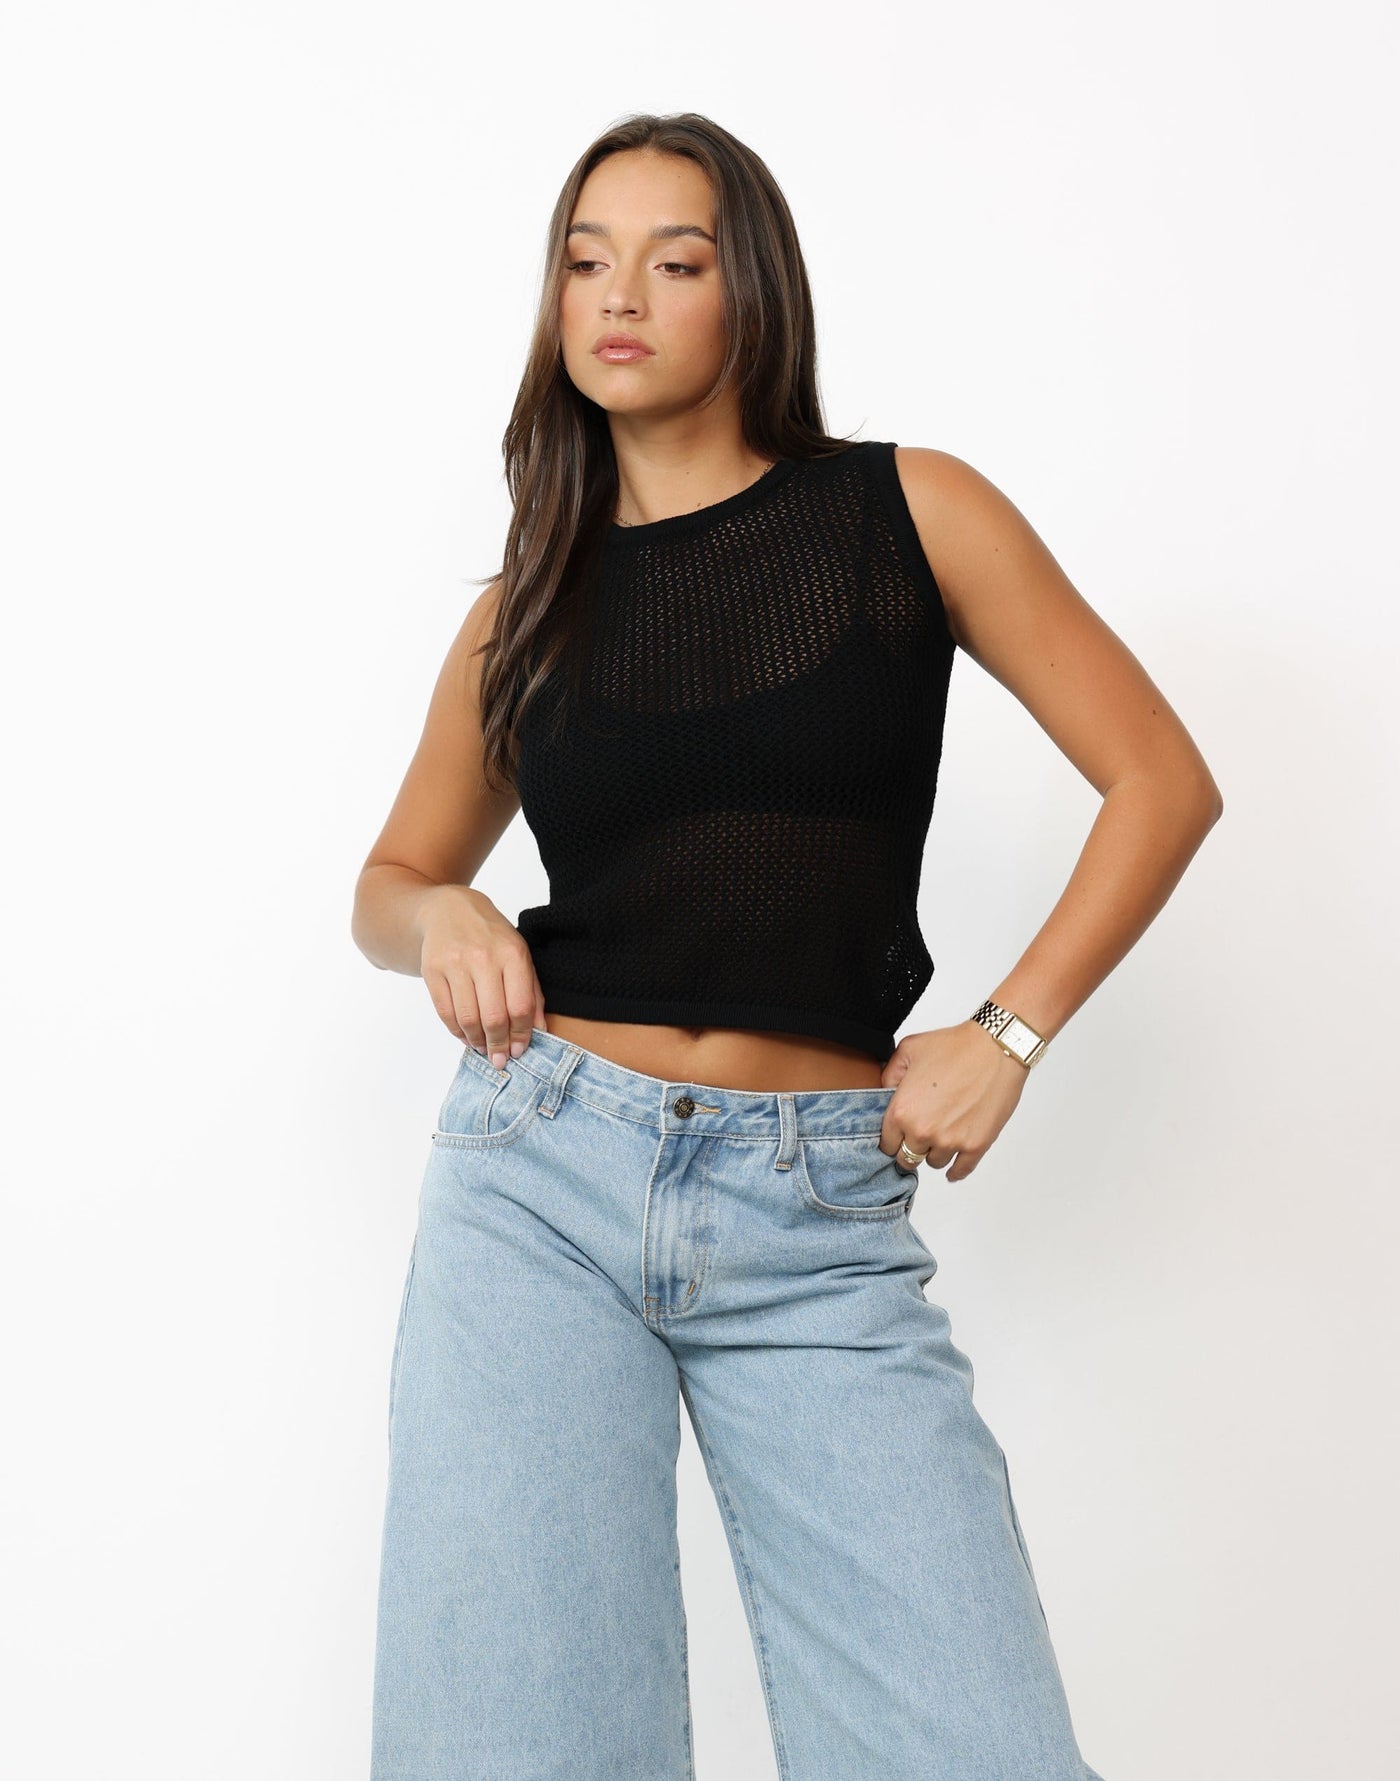 Millie Top (Black) | Charcoal Clothing Exclusive - Sheer Knit Tank Top - Women's Top - Charcoal Clothing